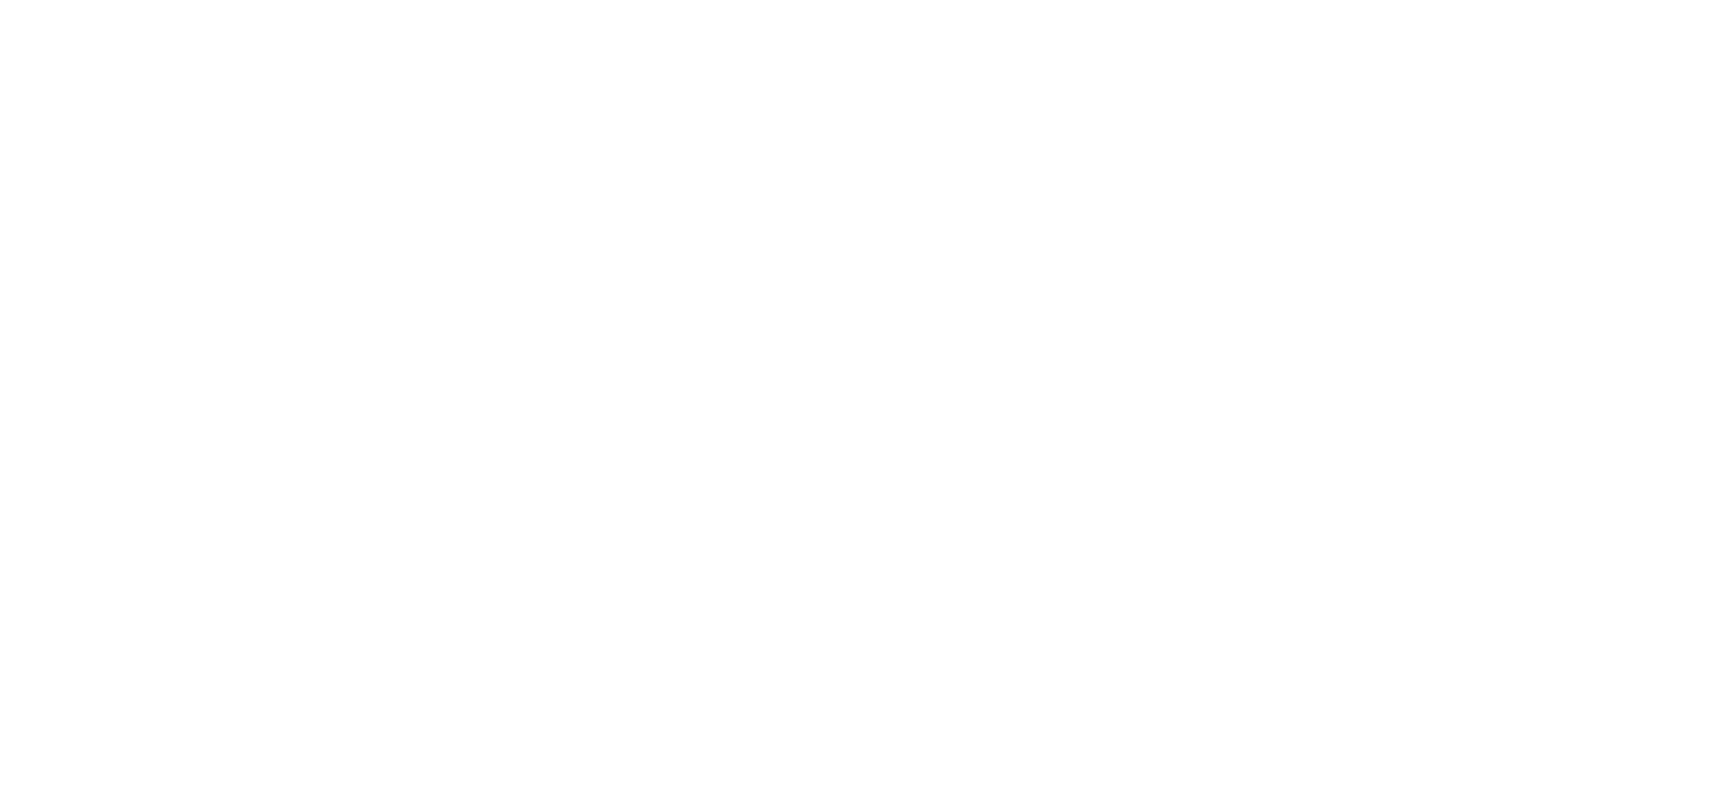 sustainable seafood catalogue